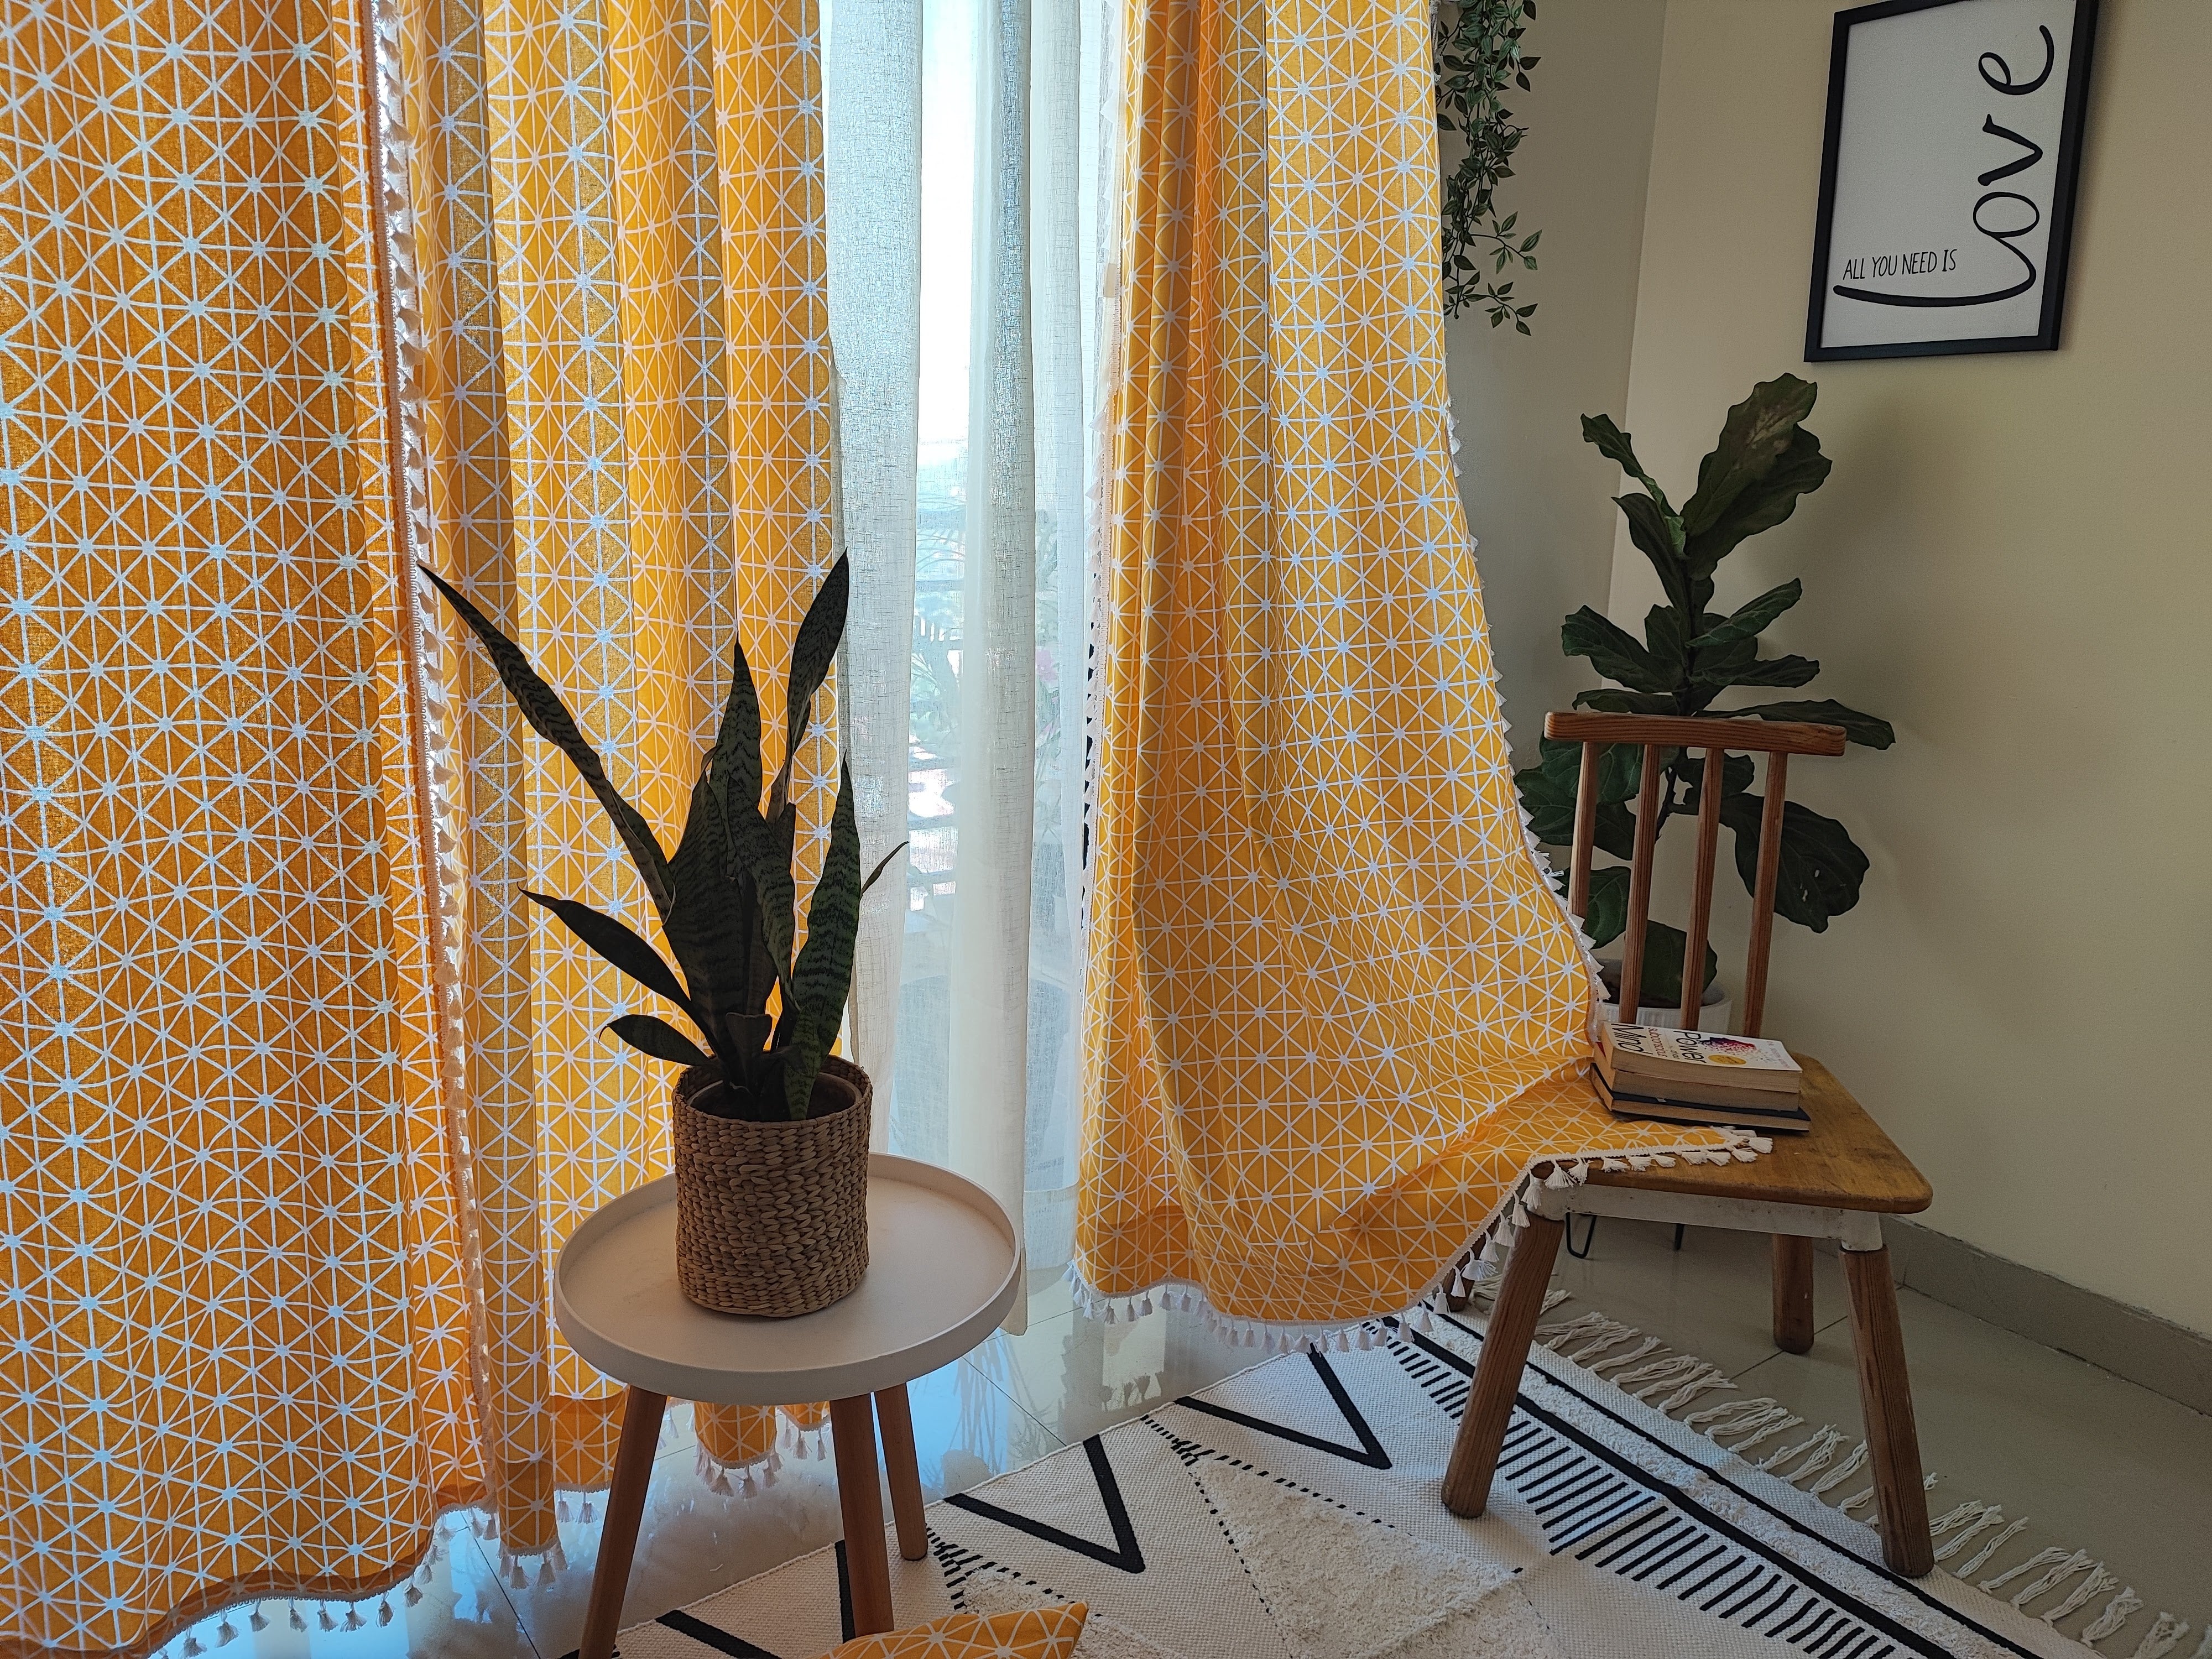 The Versatility of Curtains: Privacy, Light Control, Decor, and Energy Efficiency